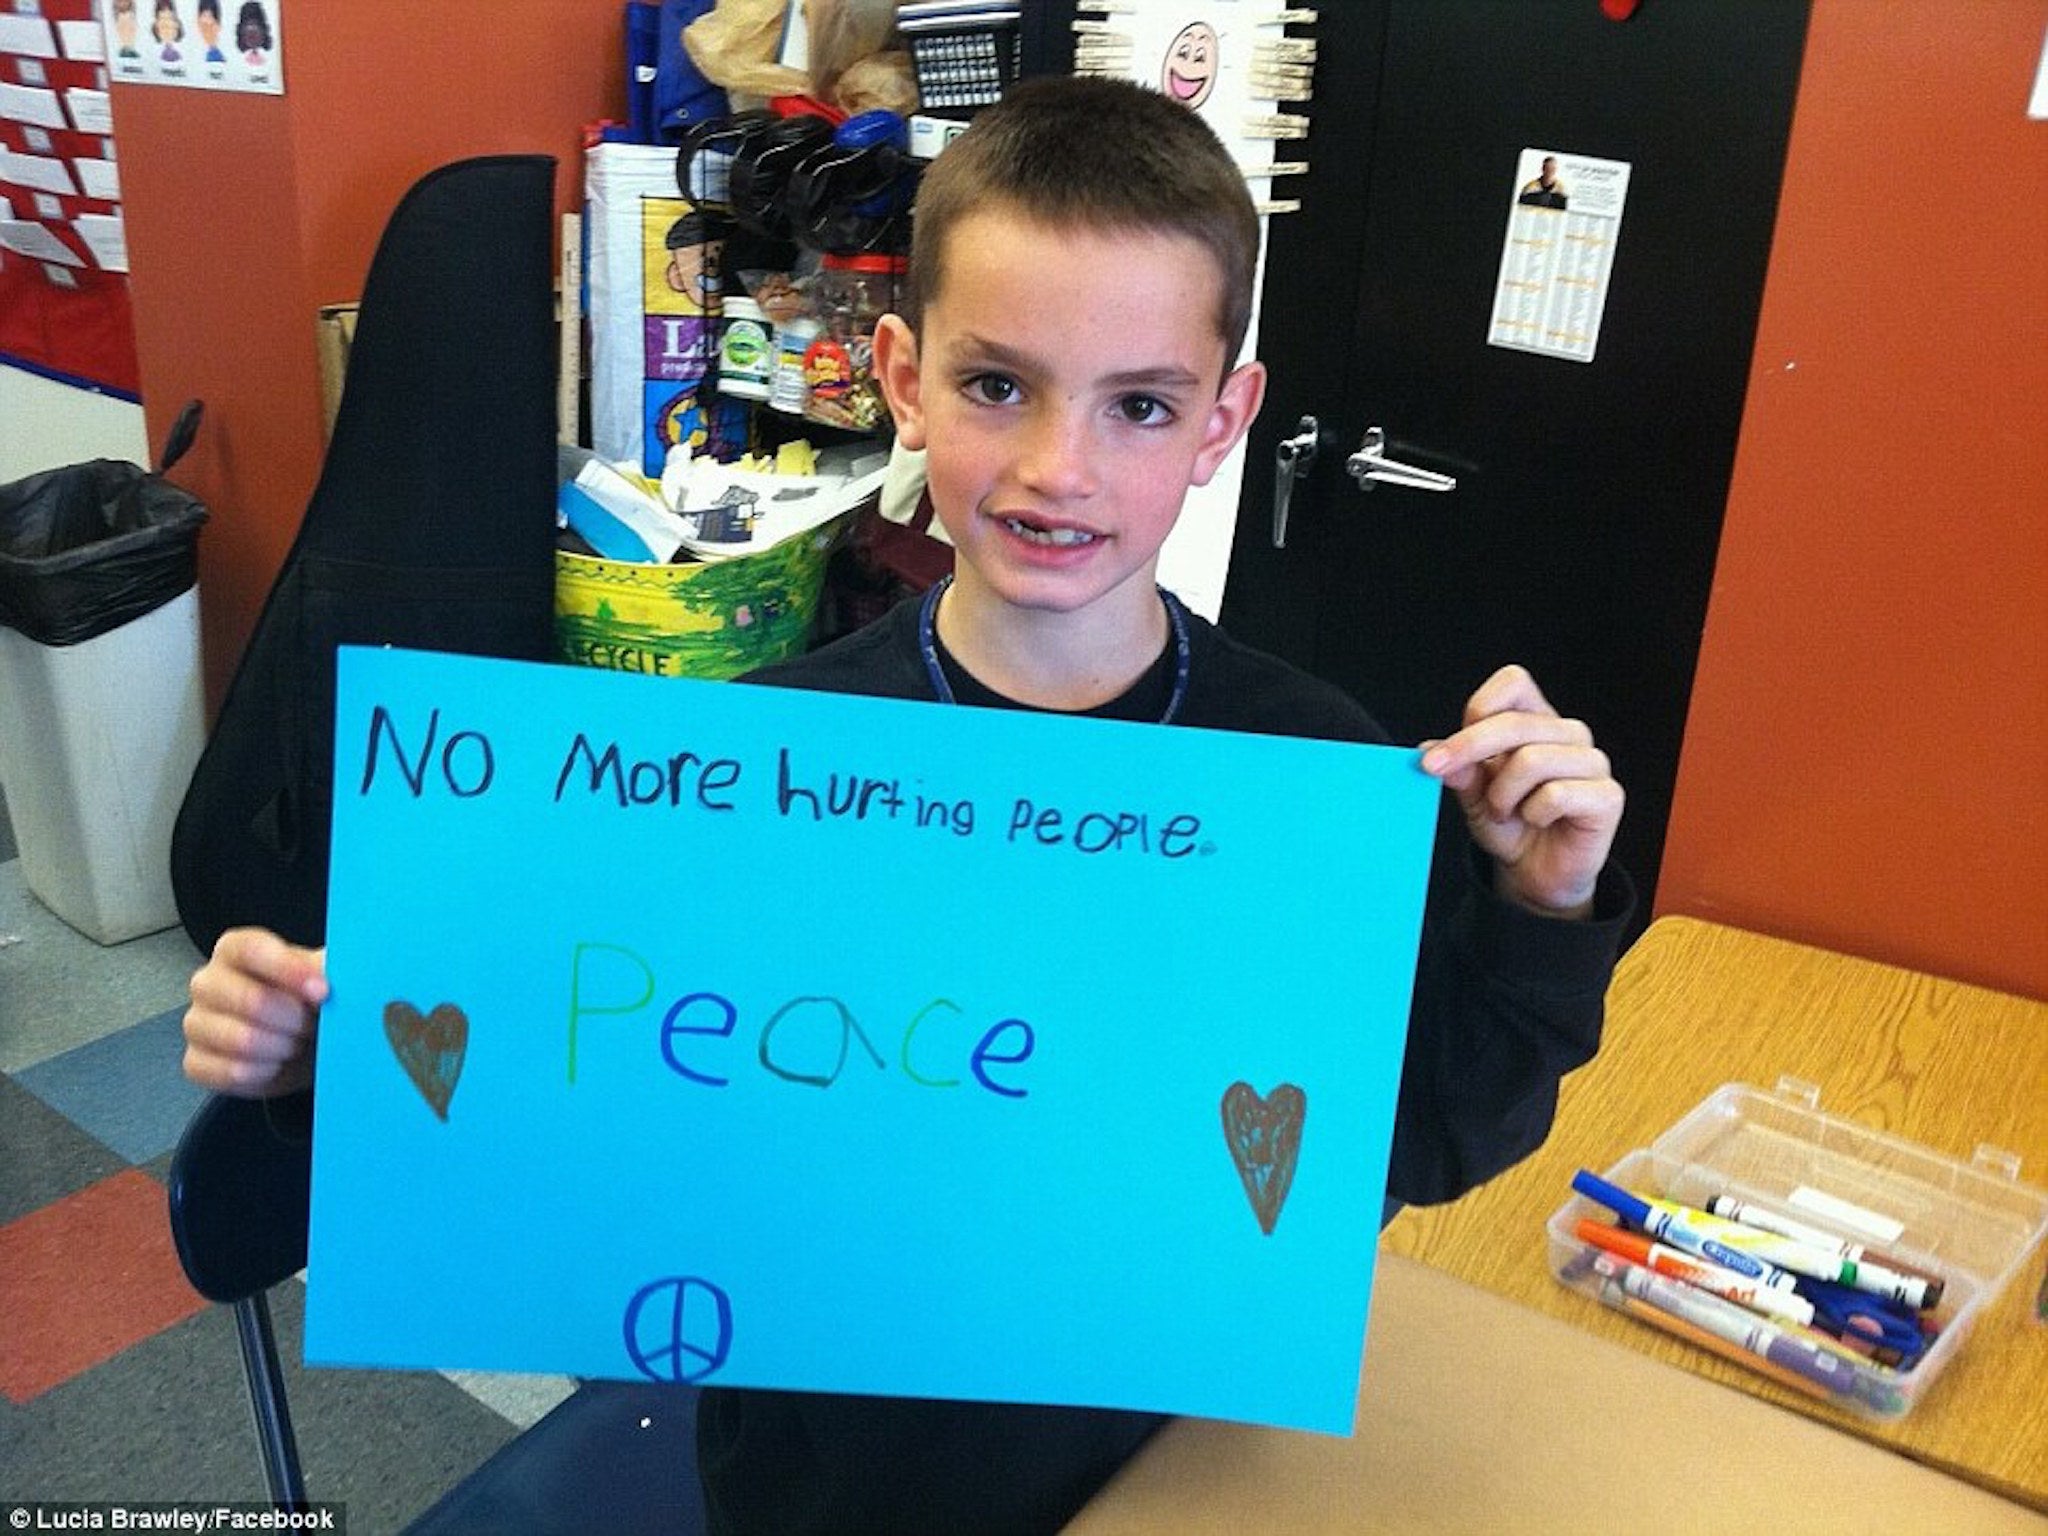 Martin Richard was one of three people killed in the 2013 attack